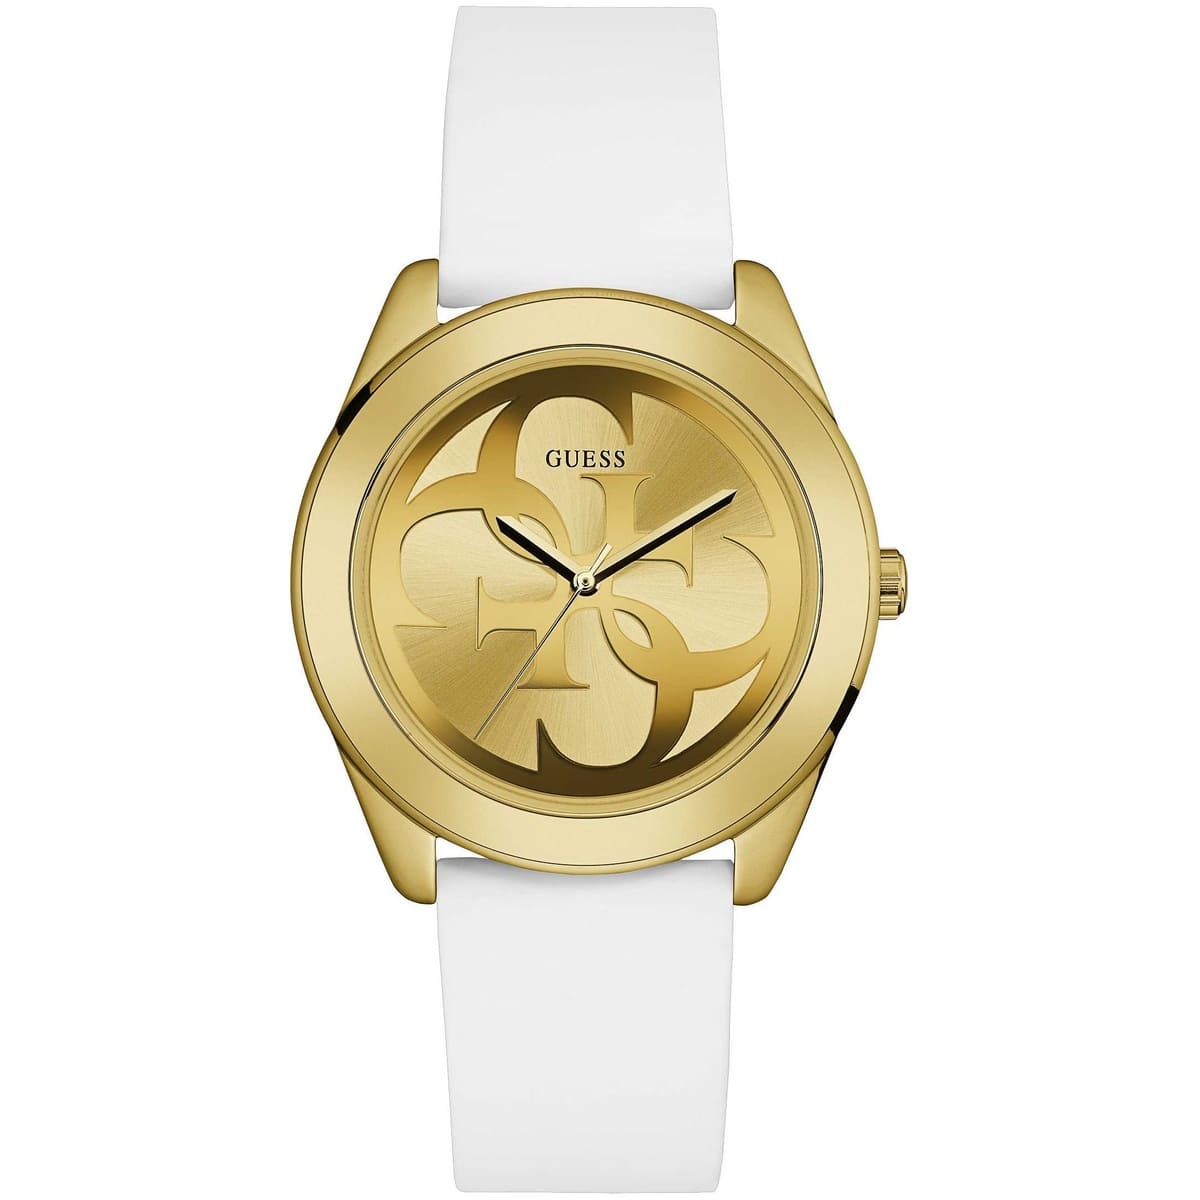 Guess Watch G-Twist W0911L7 | Watches Prime